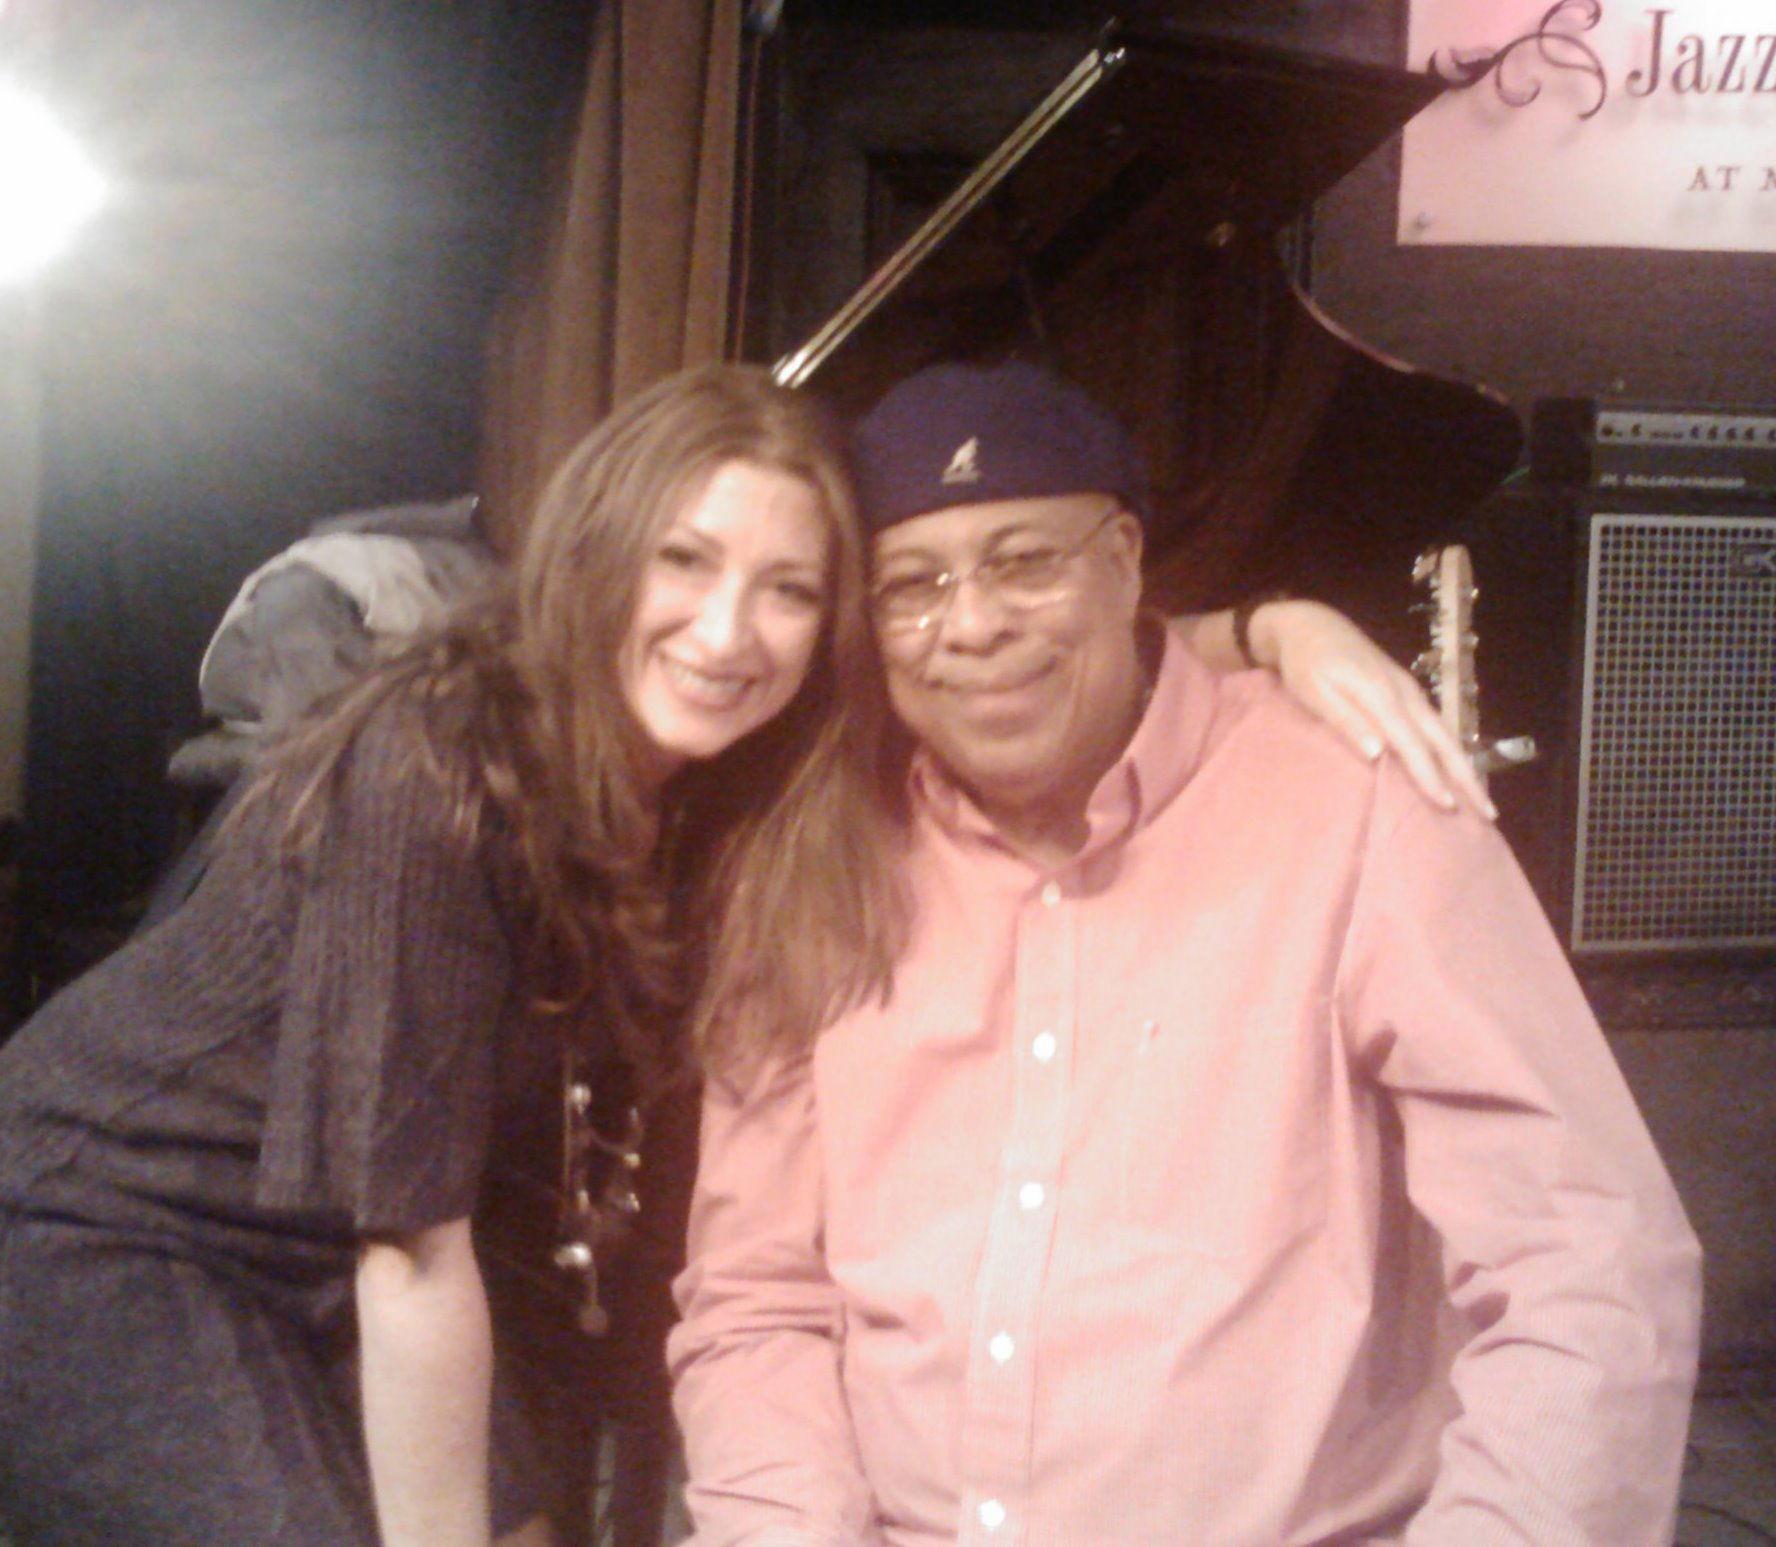 With the incredible Cuban pianist Chucho Valdes at Music Hall, Detroit!